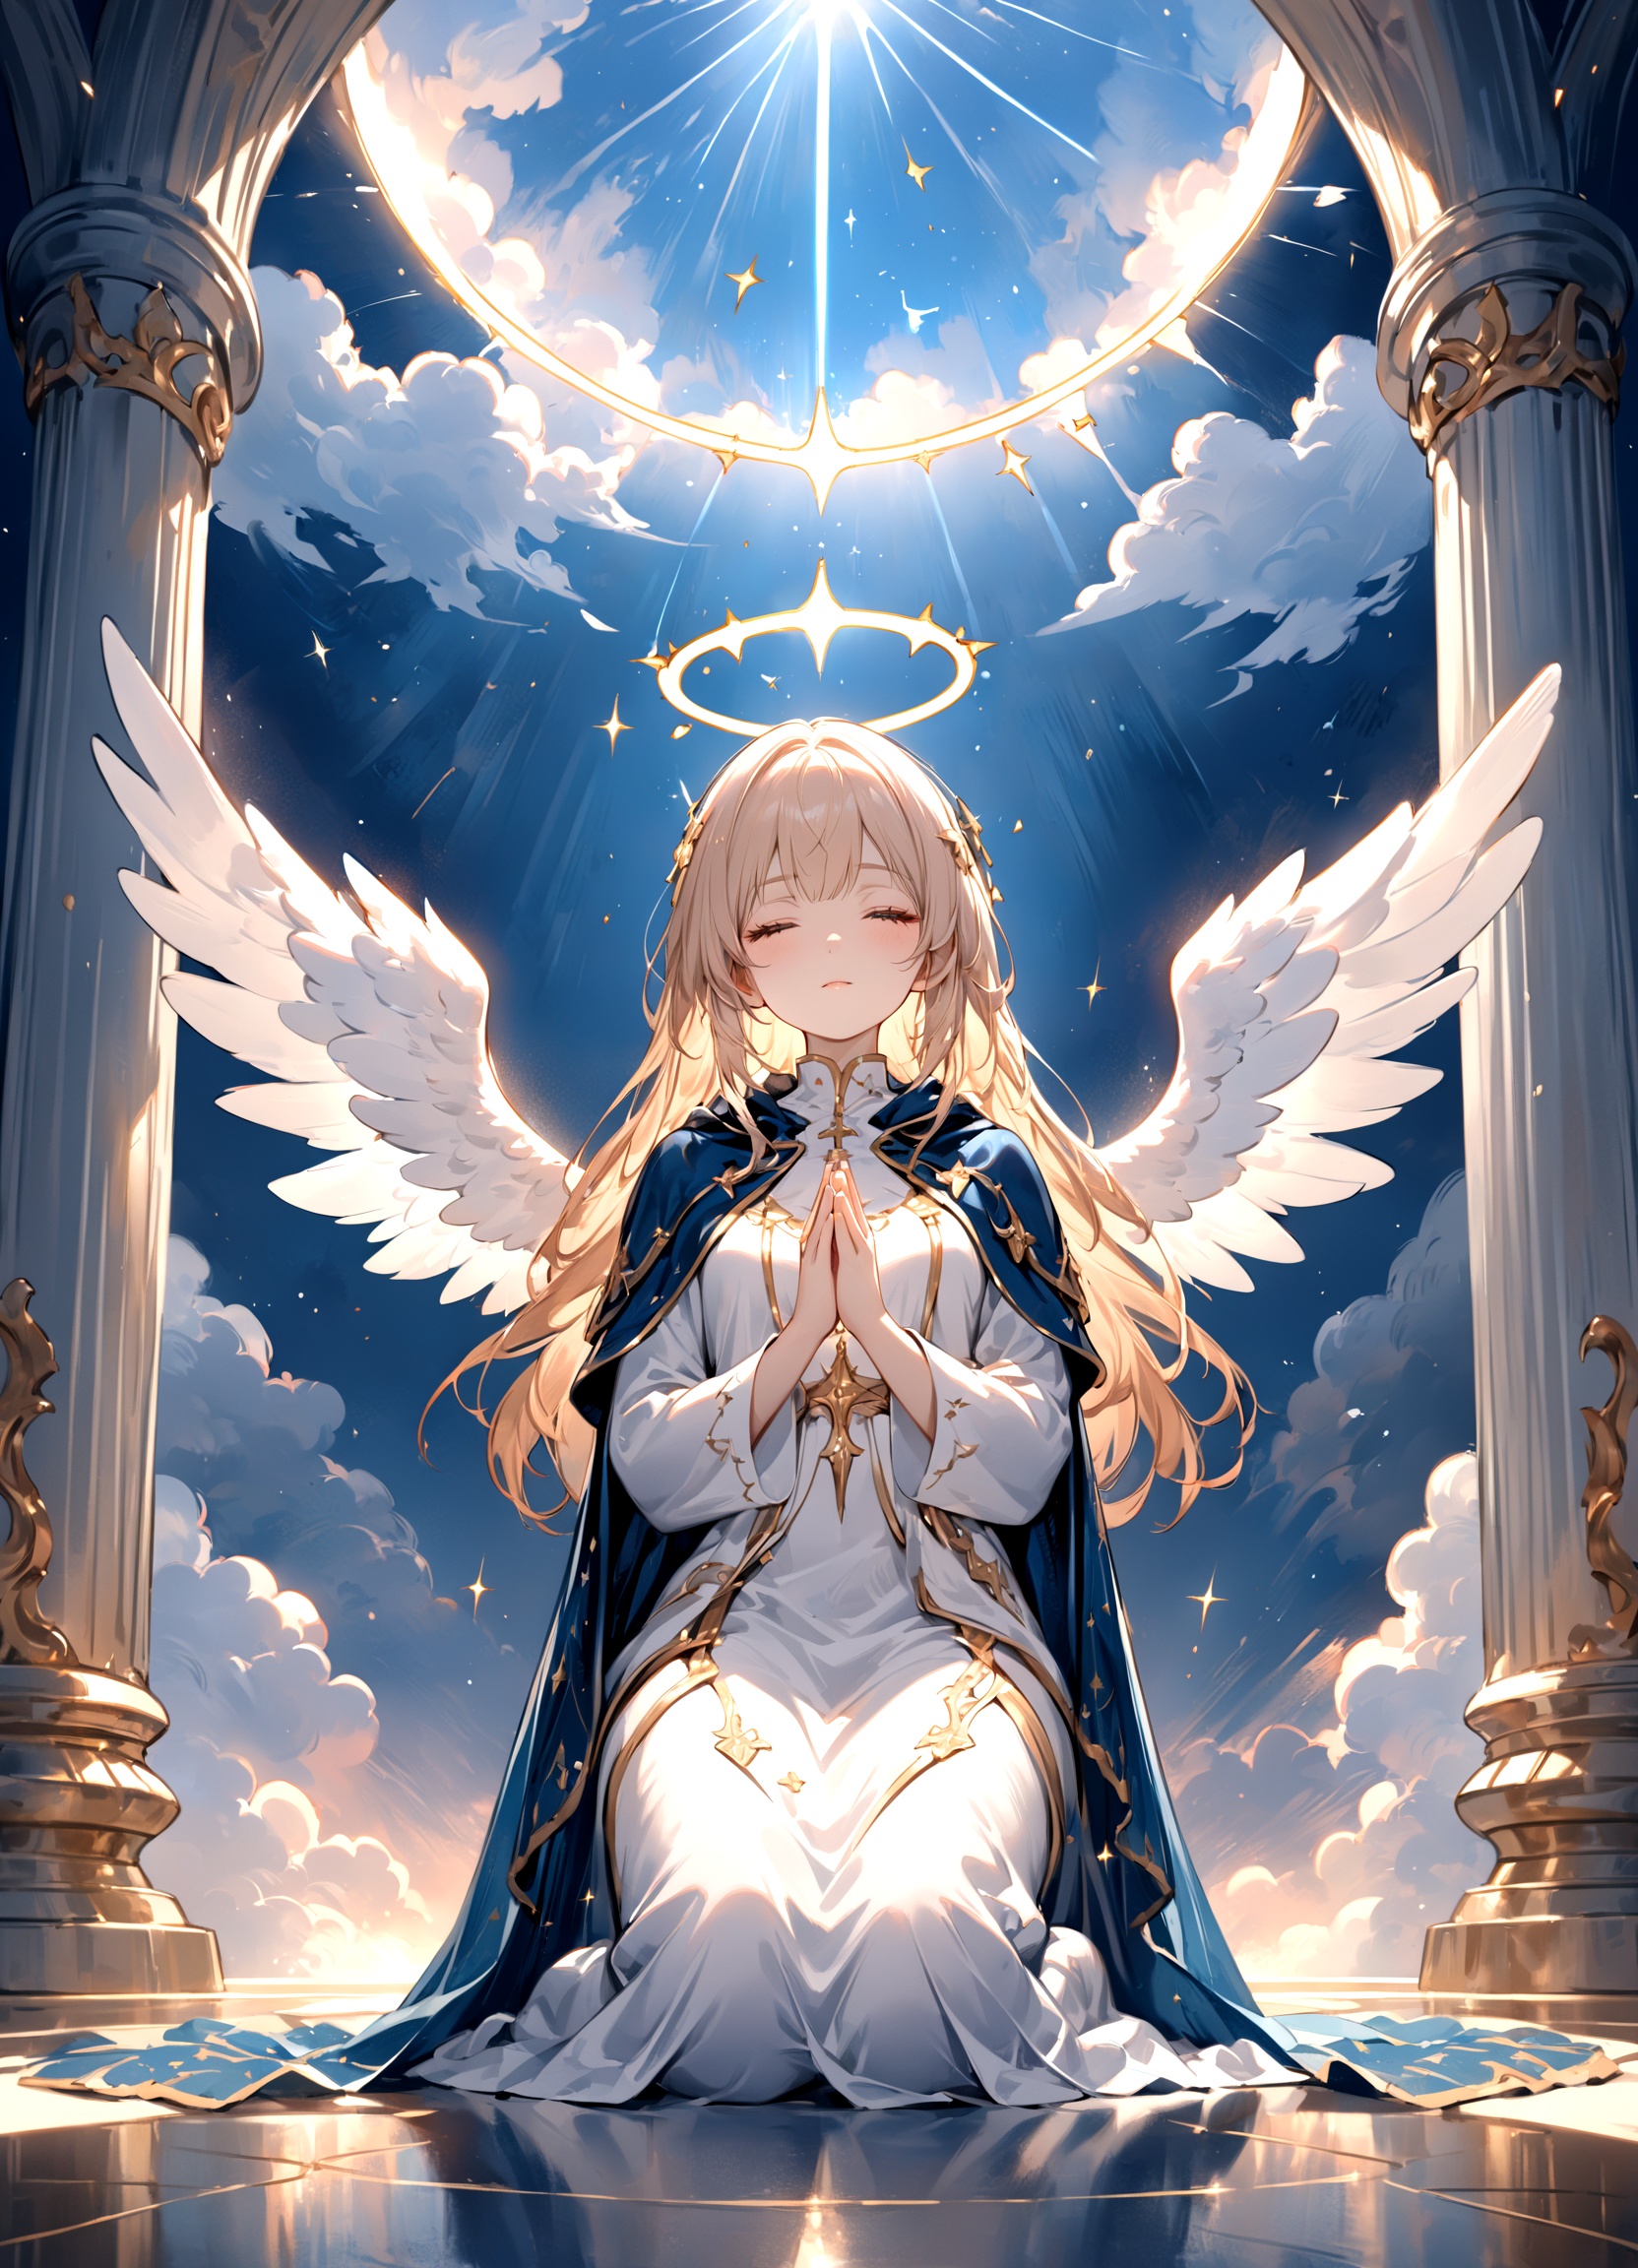 painting of a woman wearing shabby cape kneeling on the ground praying to the sky for peace.looking down. (praying:1.5).the sky is cloudy but with some sunlight rays through the clouds, light particles surrounded the woman. delicate face, pretty face, masterpiece, highres, delicate details, angel wings in the sky.celestial, ethereal, painterly, epic, magical, fantasy art, dreamy, vibrant, beautiful, detailed, textural,holy lighting, halo,Pillar of light